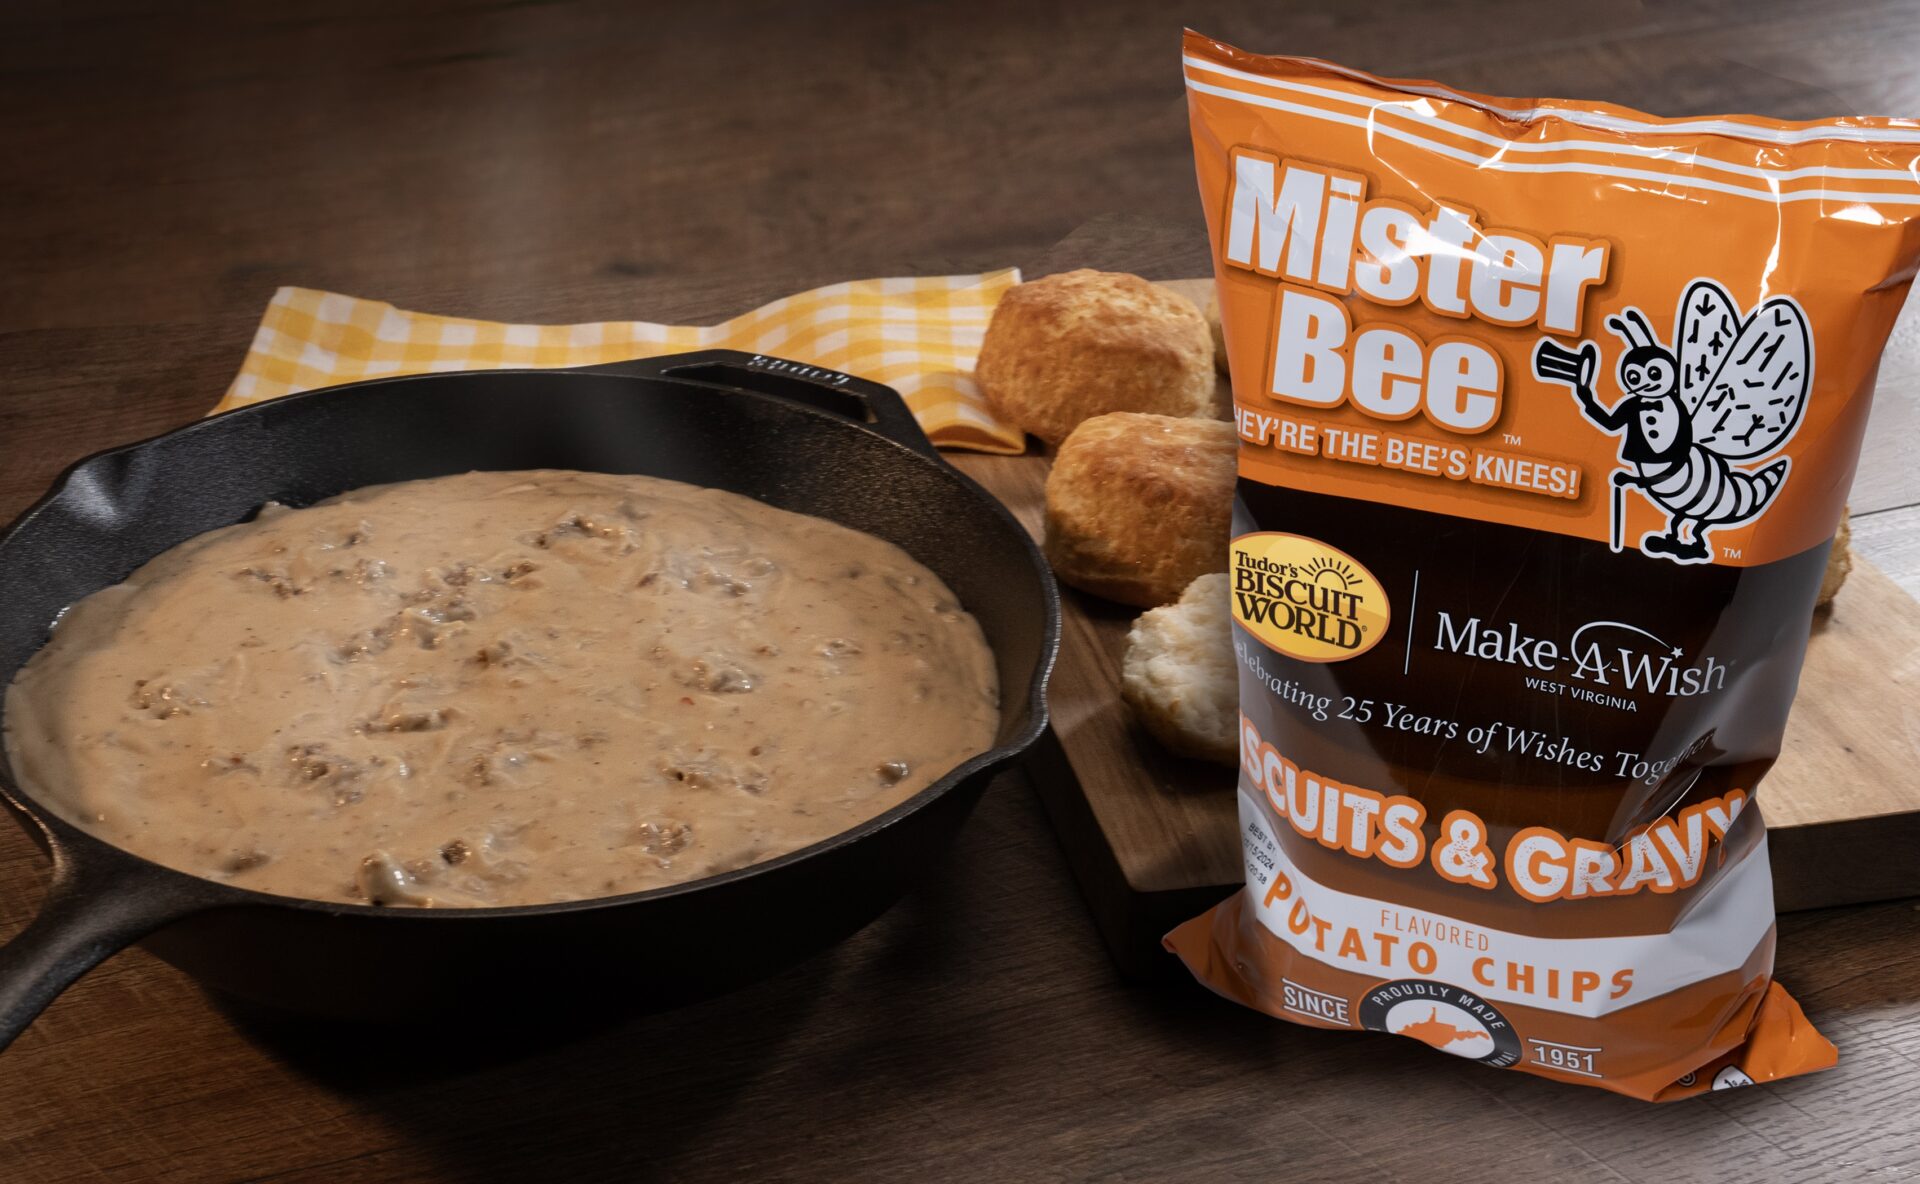 Tudor’s And Mister Bee Collaborate On Biscuits And Gravy Chip For Charity